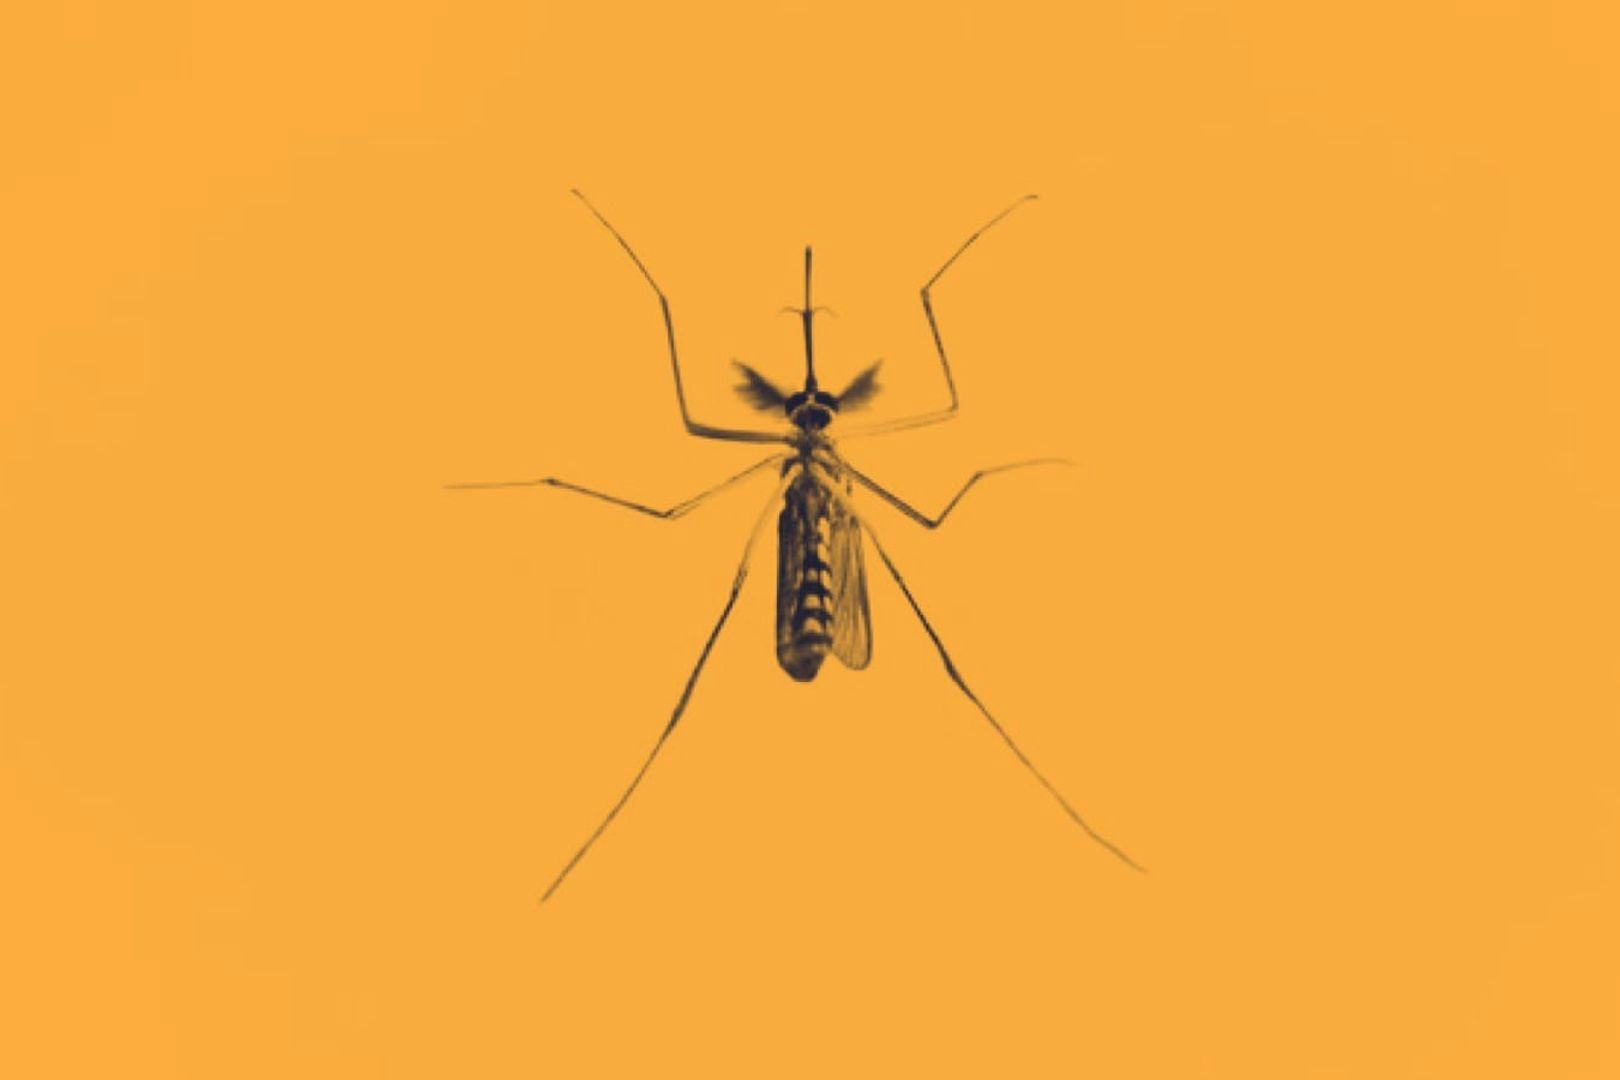 A close up image of a mosquito that sits in the centre of a plain orange background.